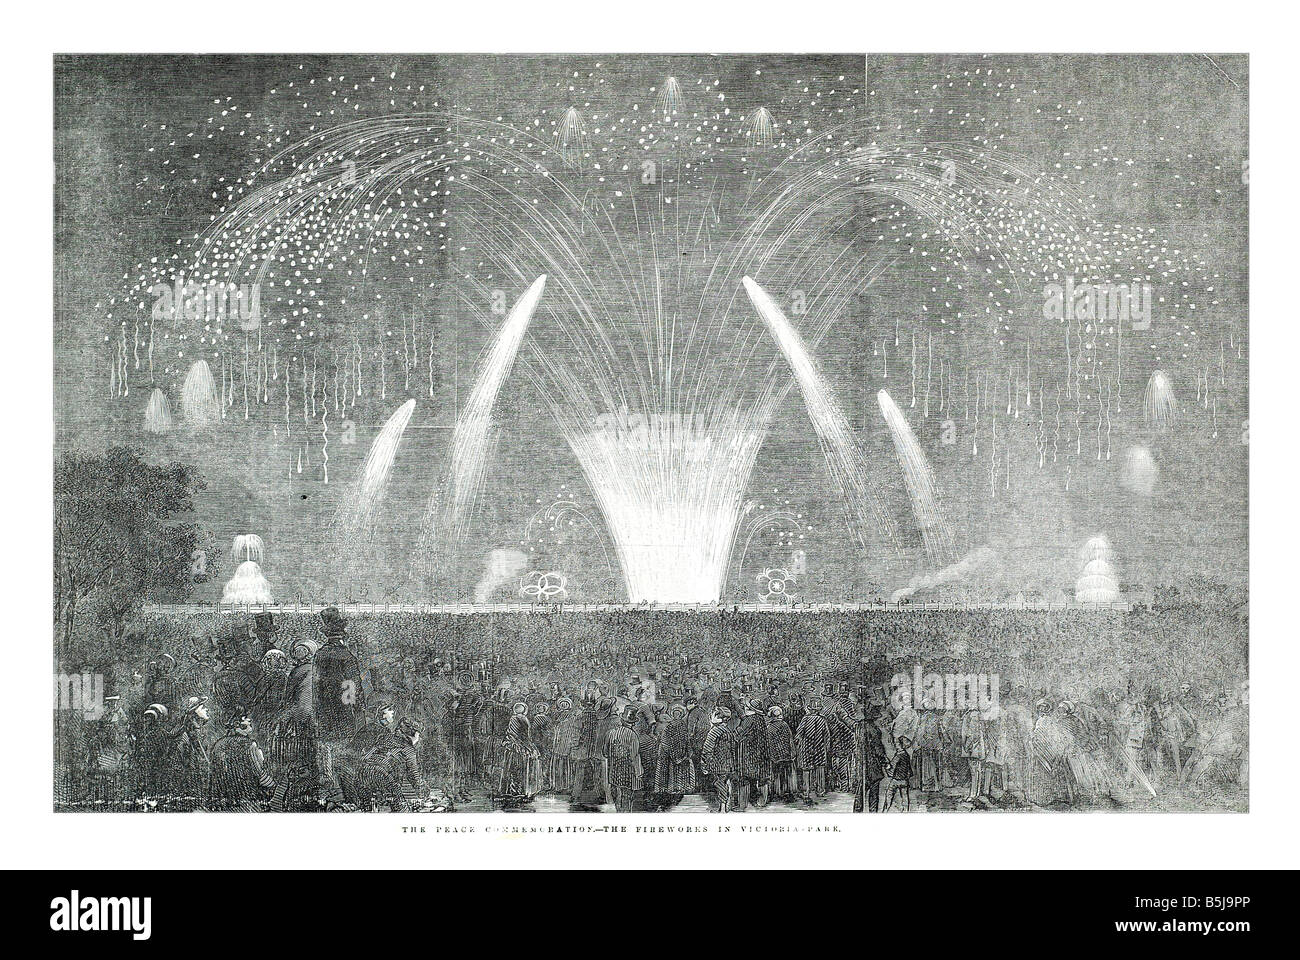 The peace commemoration the fireworks in Victoria park June 7 1856 The Illustrated London News Page 613 Stock Photo